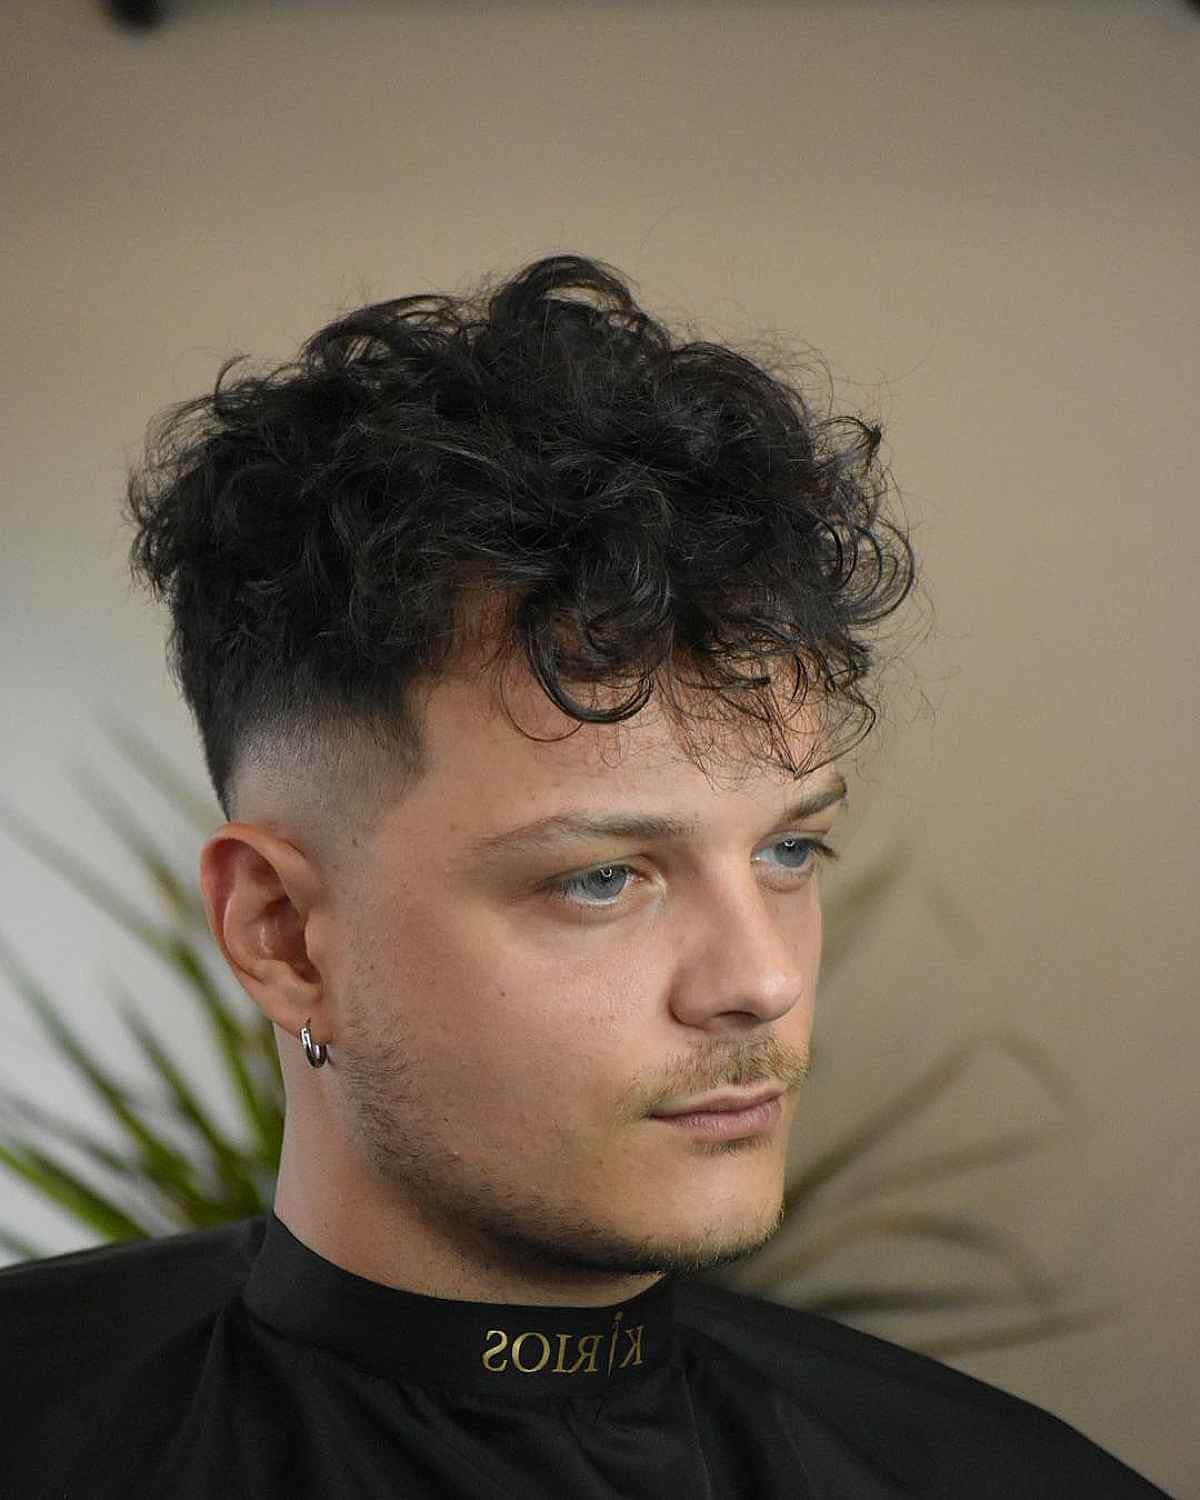 Messy curls with a line-up hairstyle for men